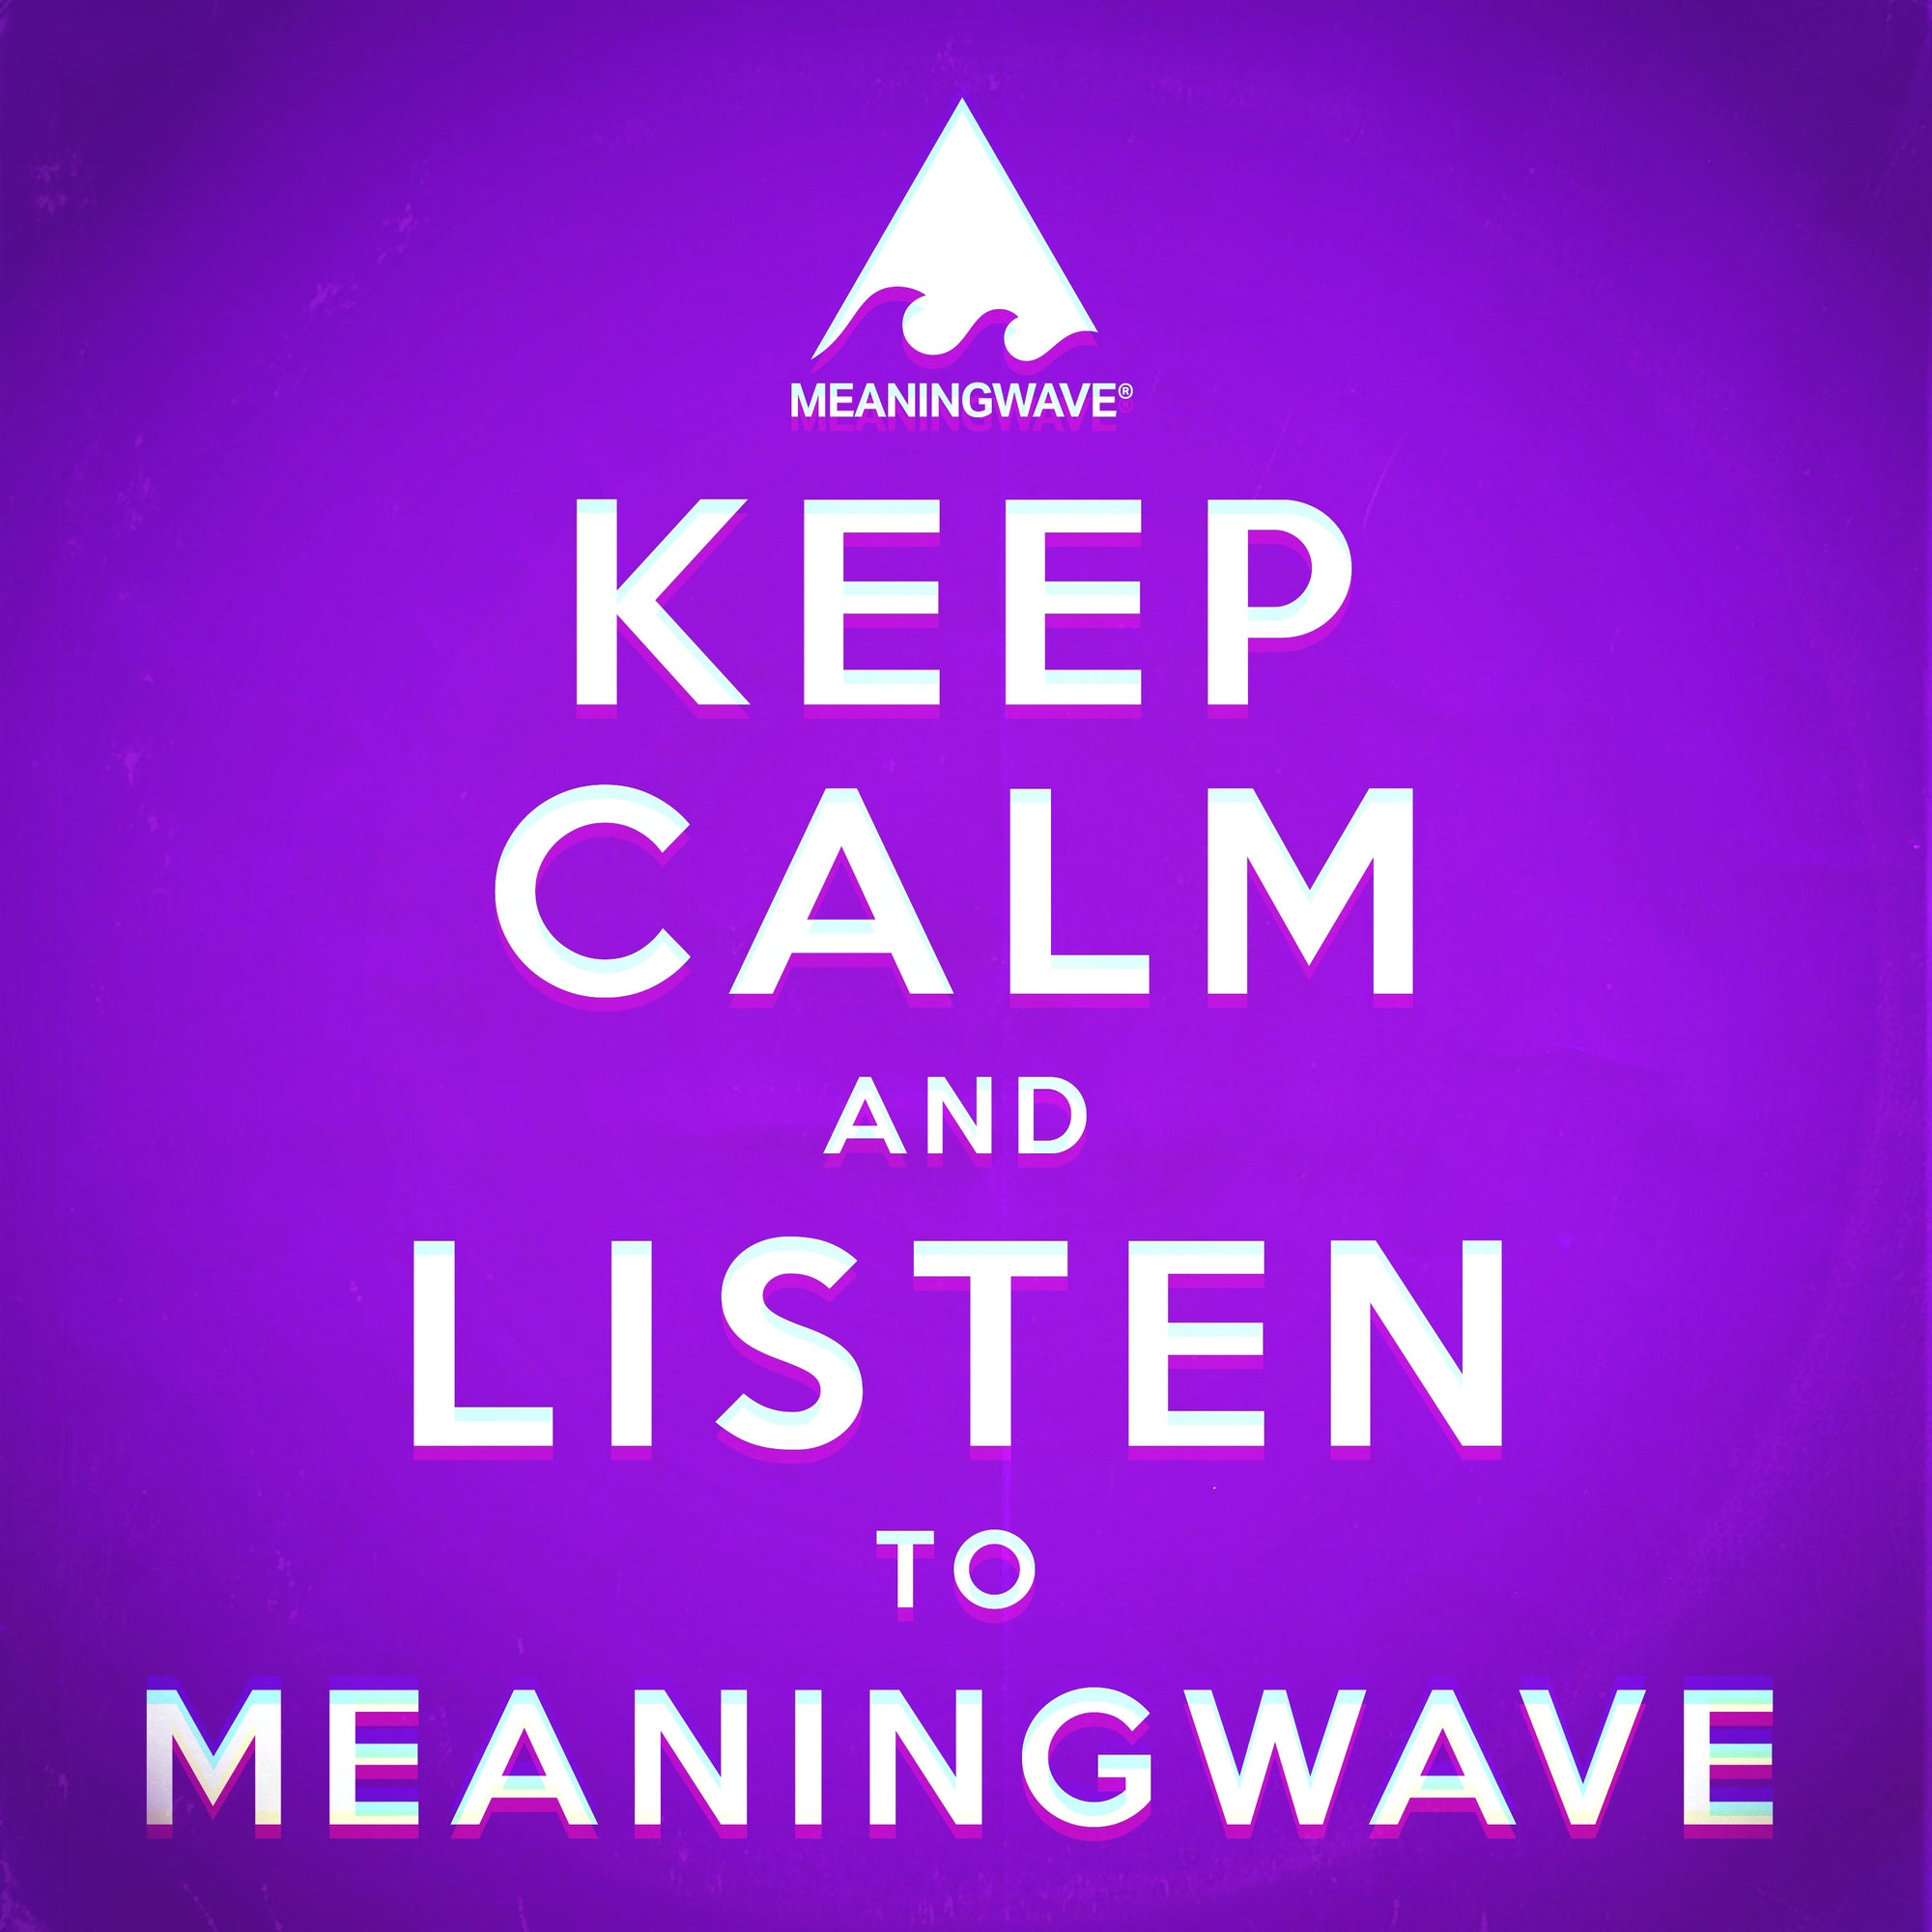 KEEP CALM AND LISTEN TO MEANINGWAVE